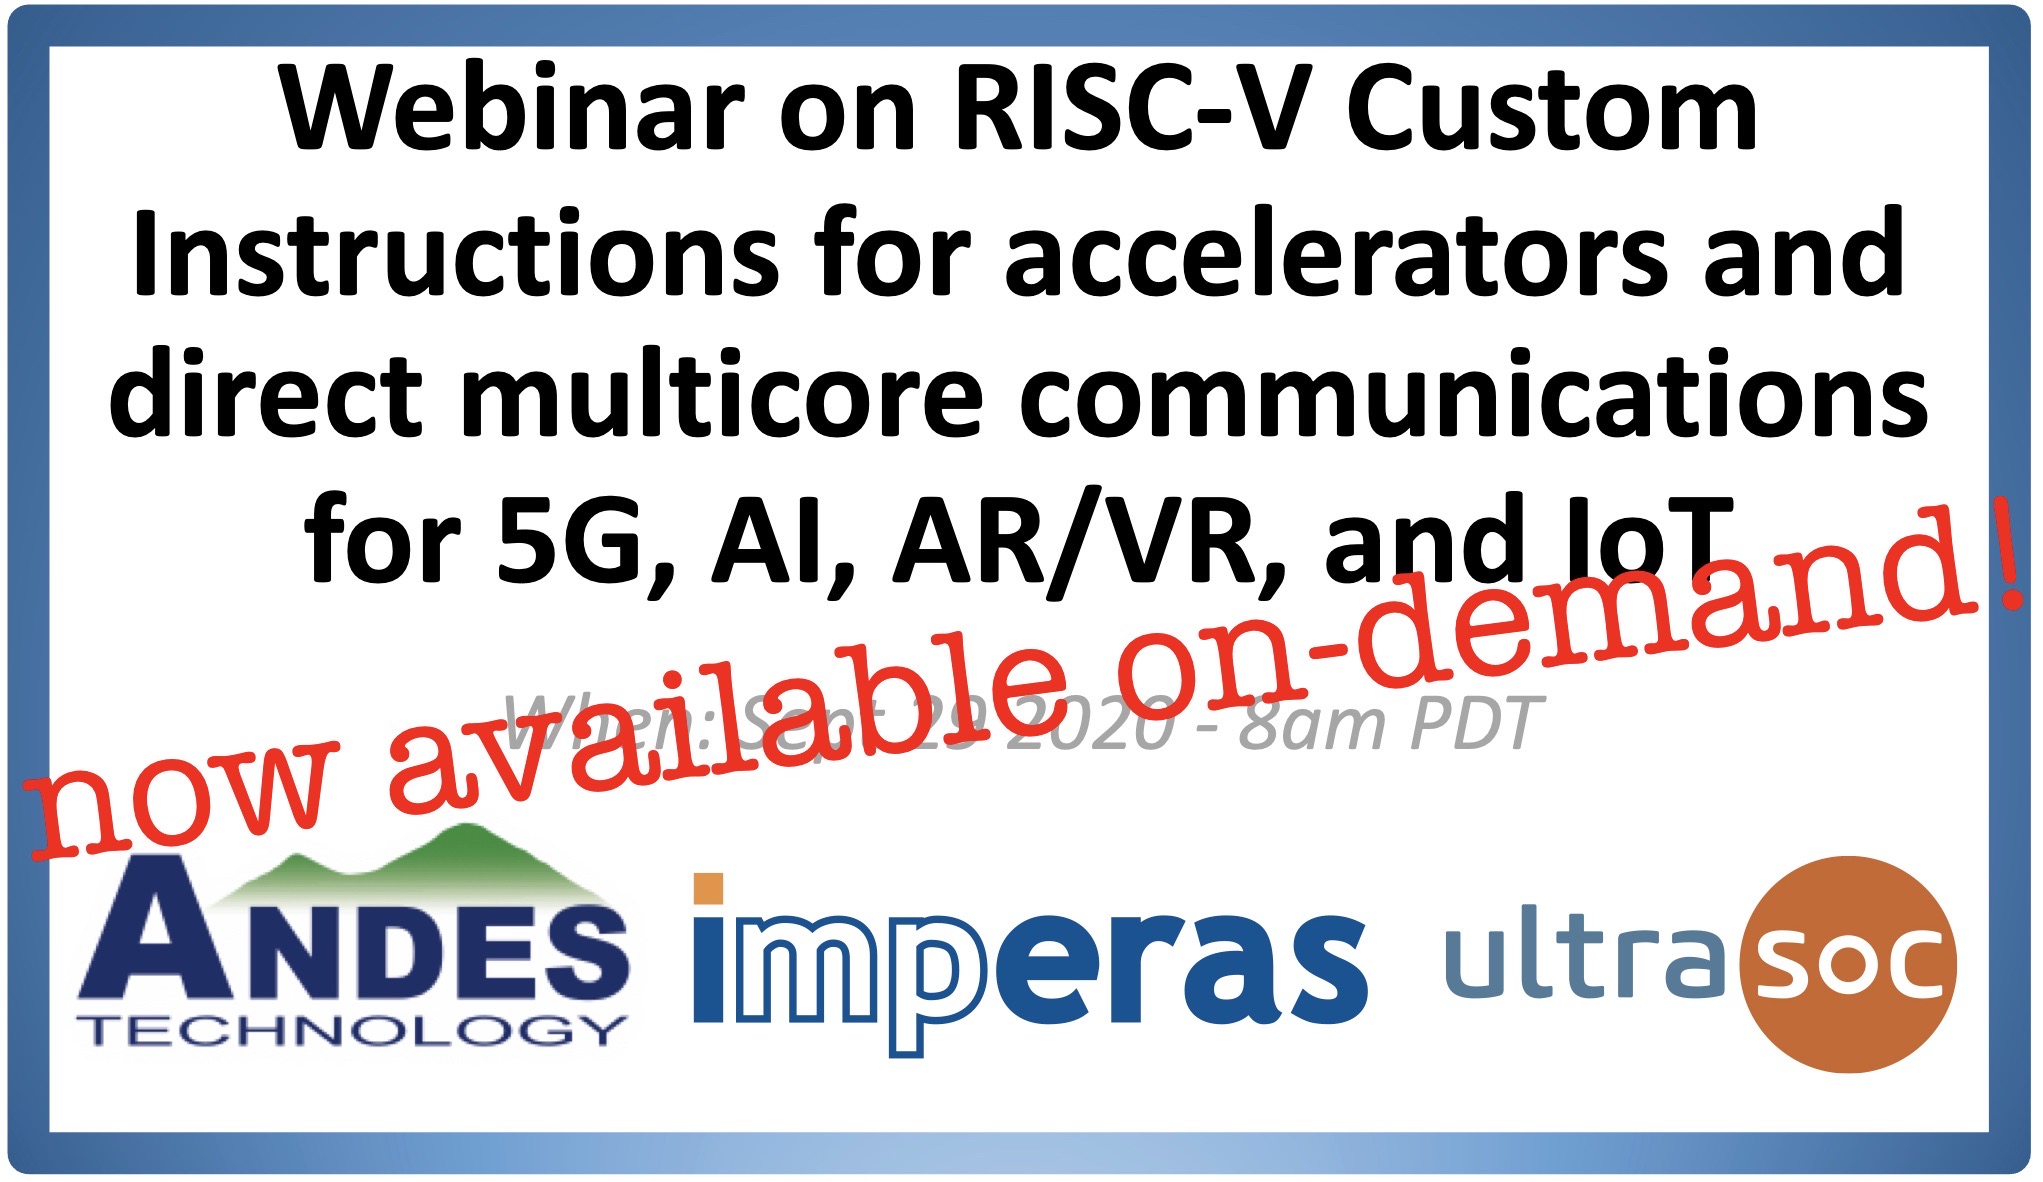 Recording now available for webinar on RISC-V Custom Instructions